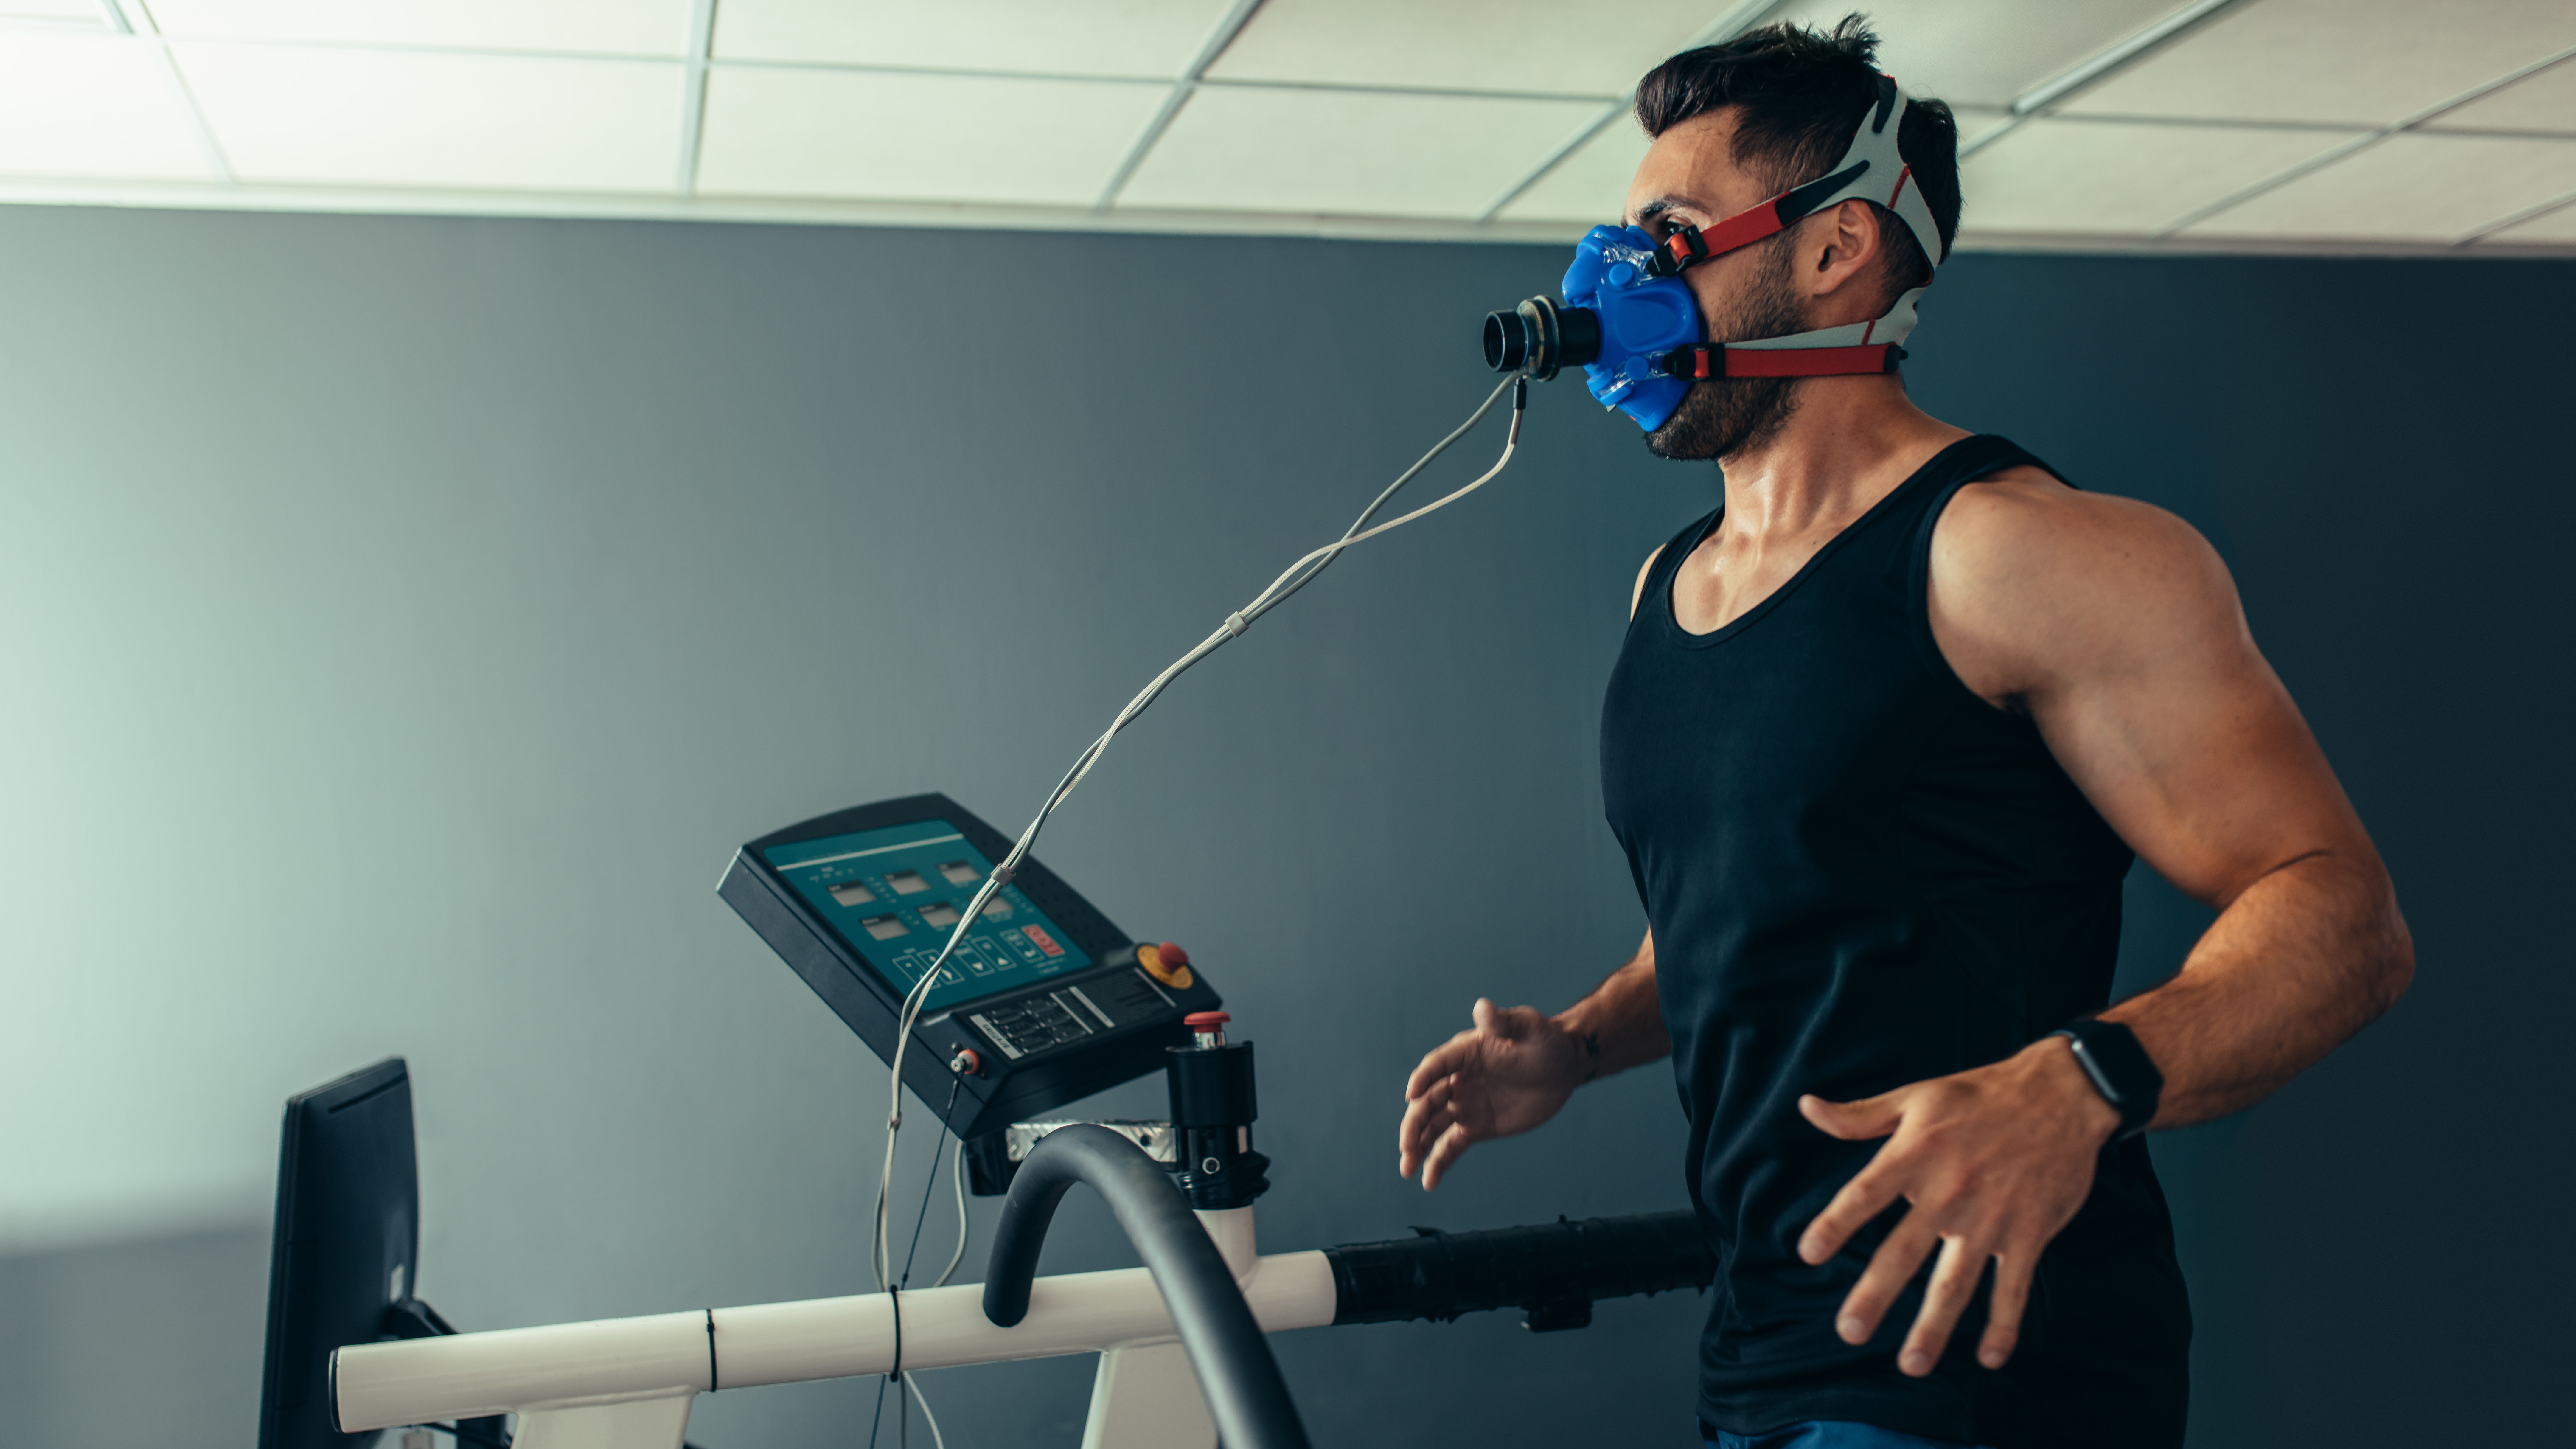 Human VO2 Max was tested on a treadmill